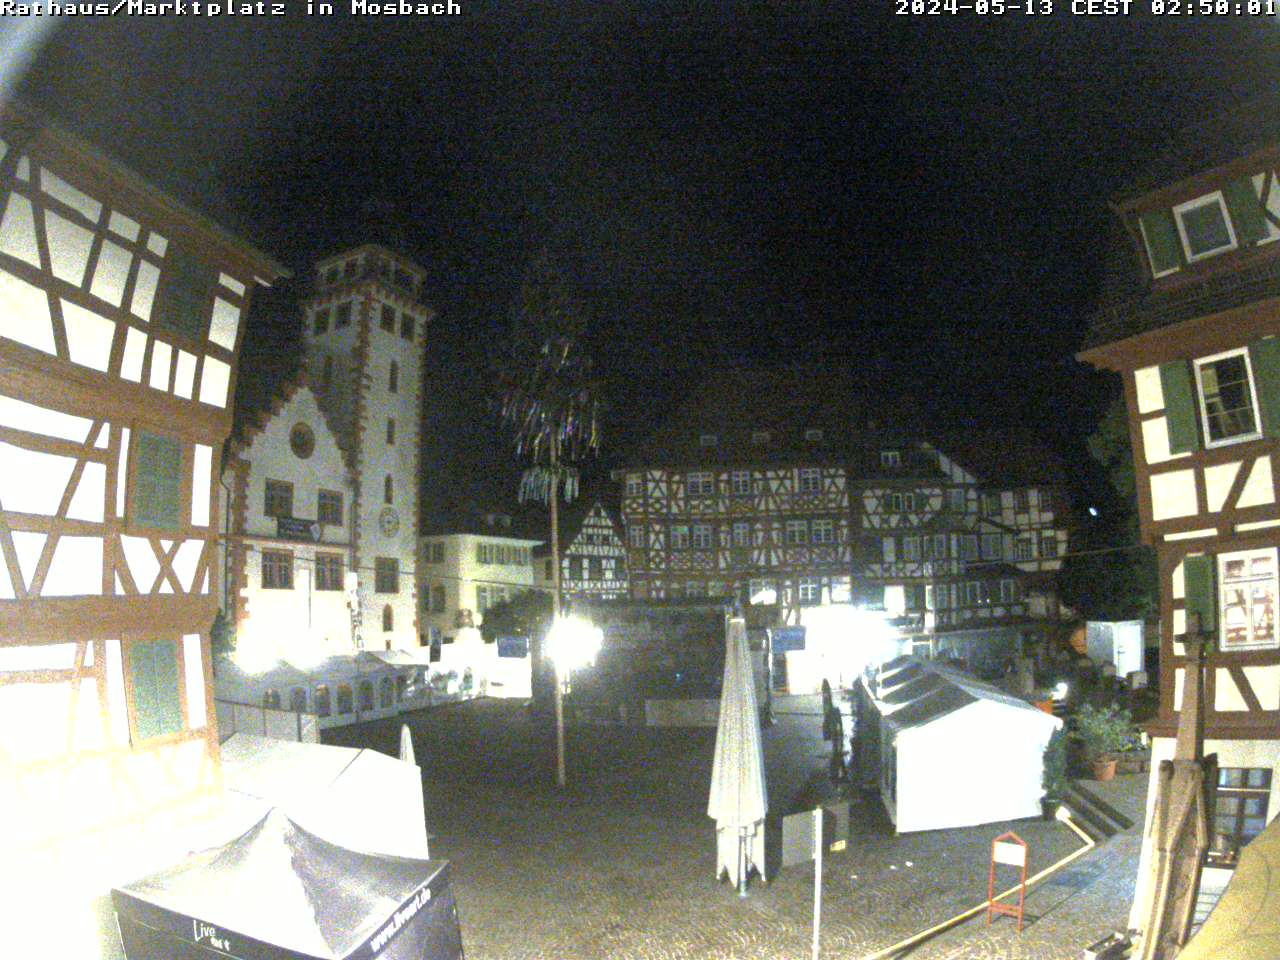 Mosbach Fre. 02:54